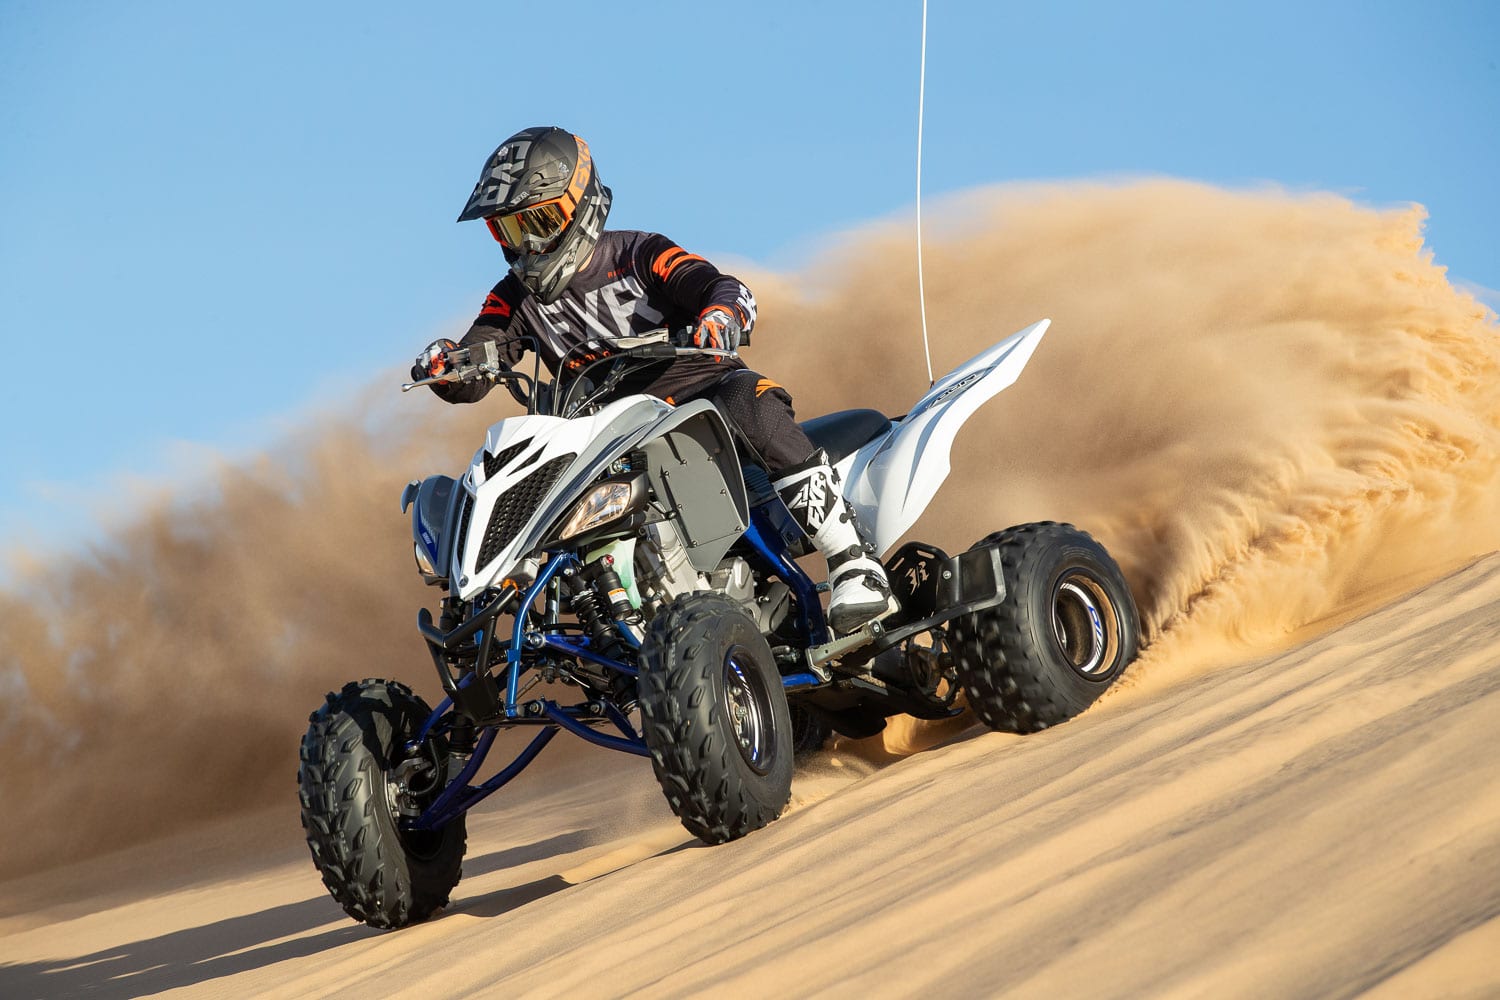 2019 Yamaha Grizzly SE Review - ATV Trail Rider Magazine